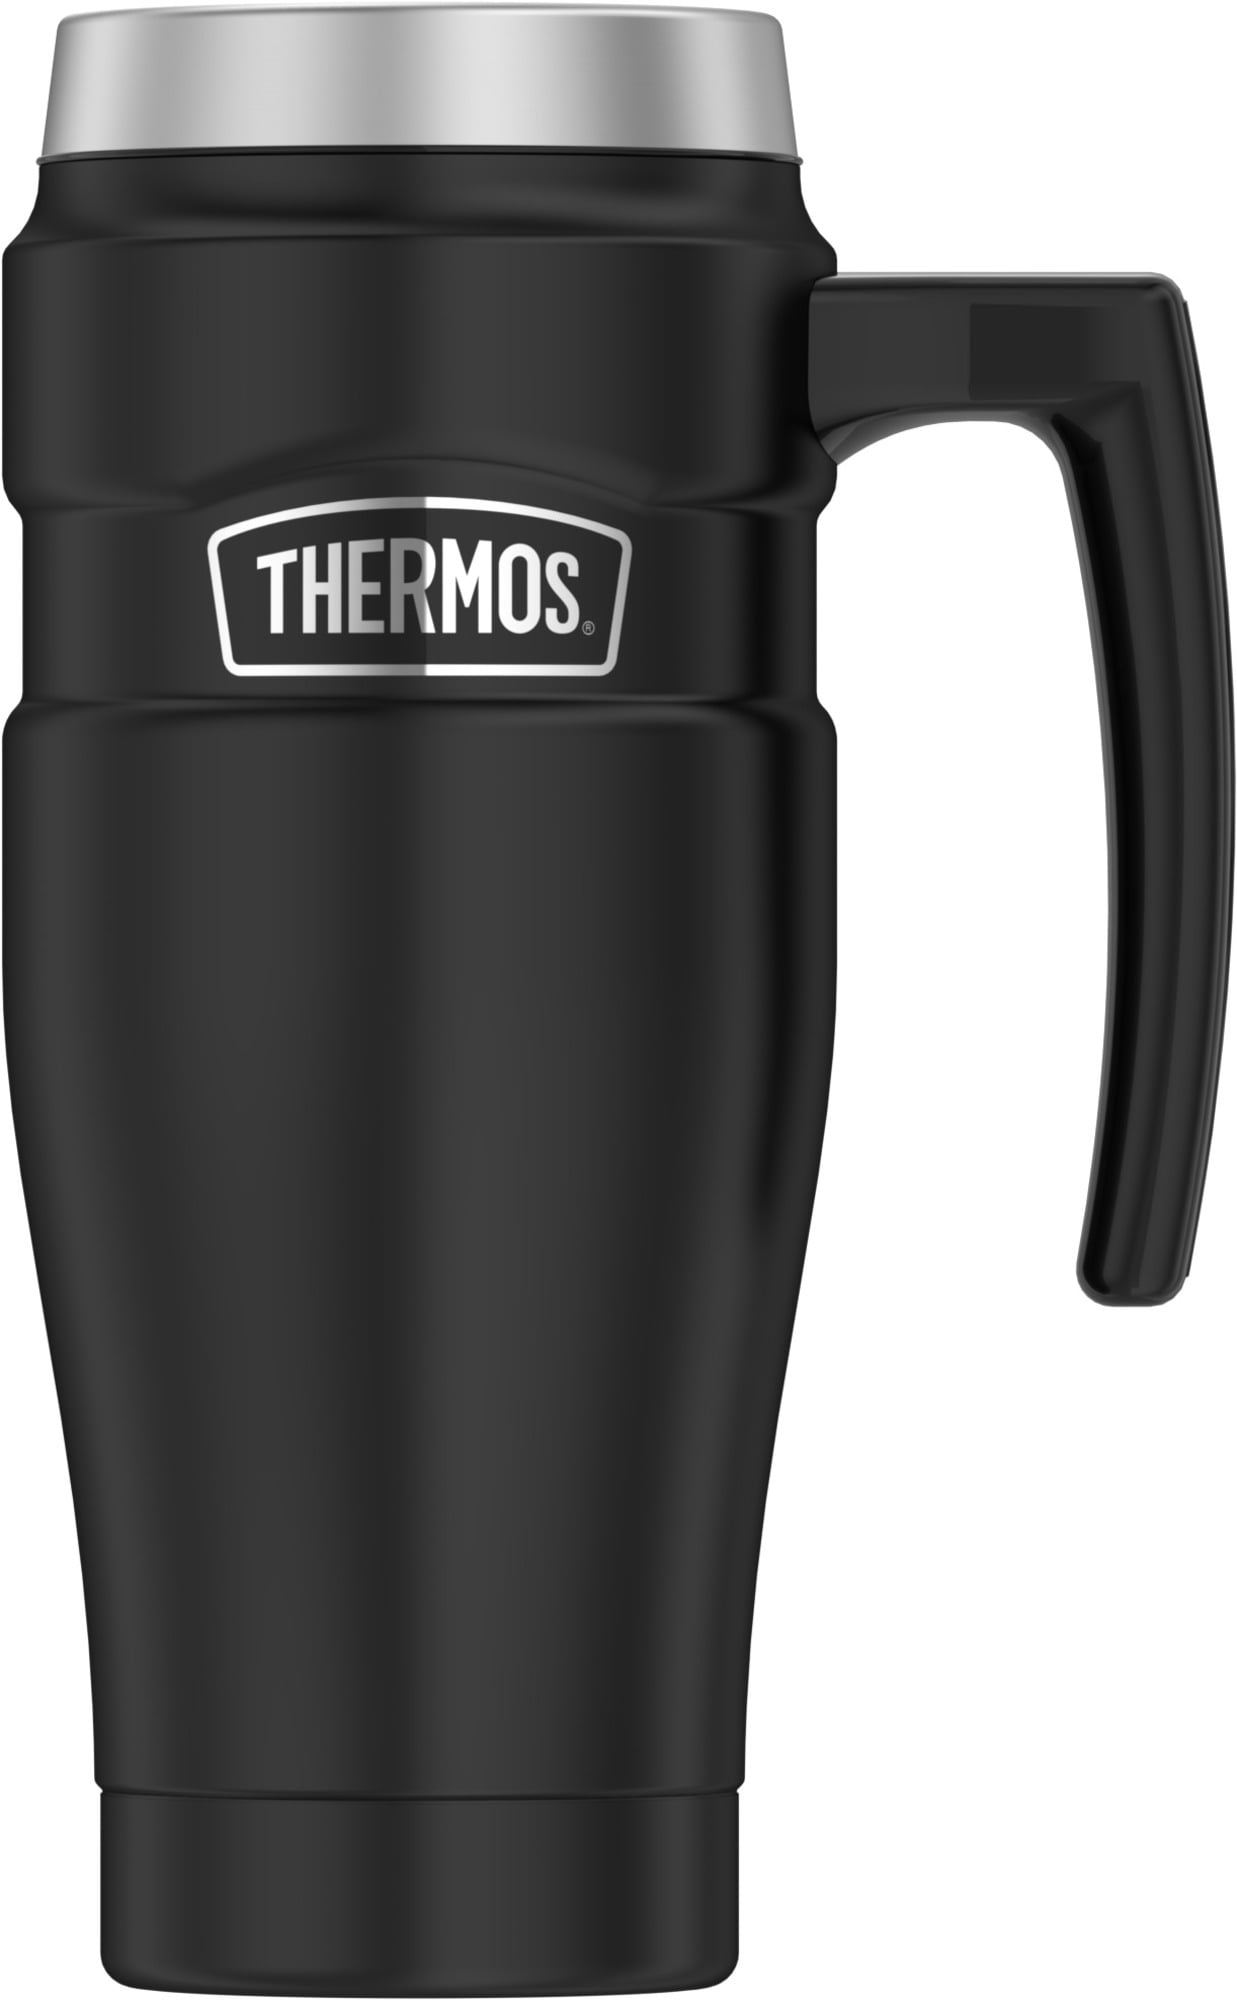 Thermos 8 16 oz. Heavy Duty Mug with Removeable Lid! Microwave Safe